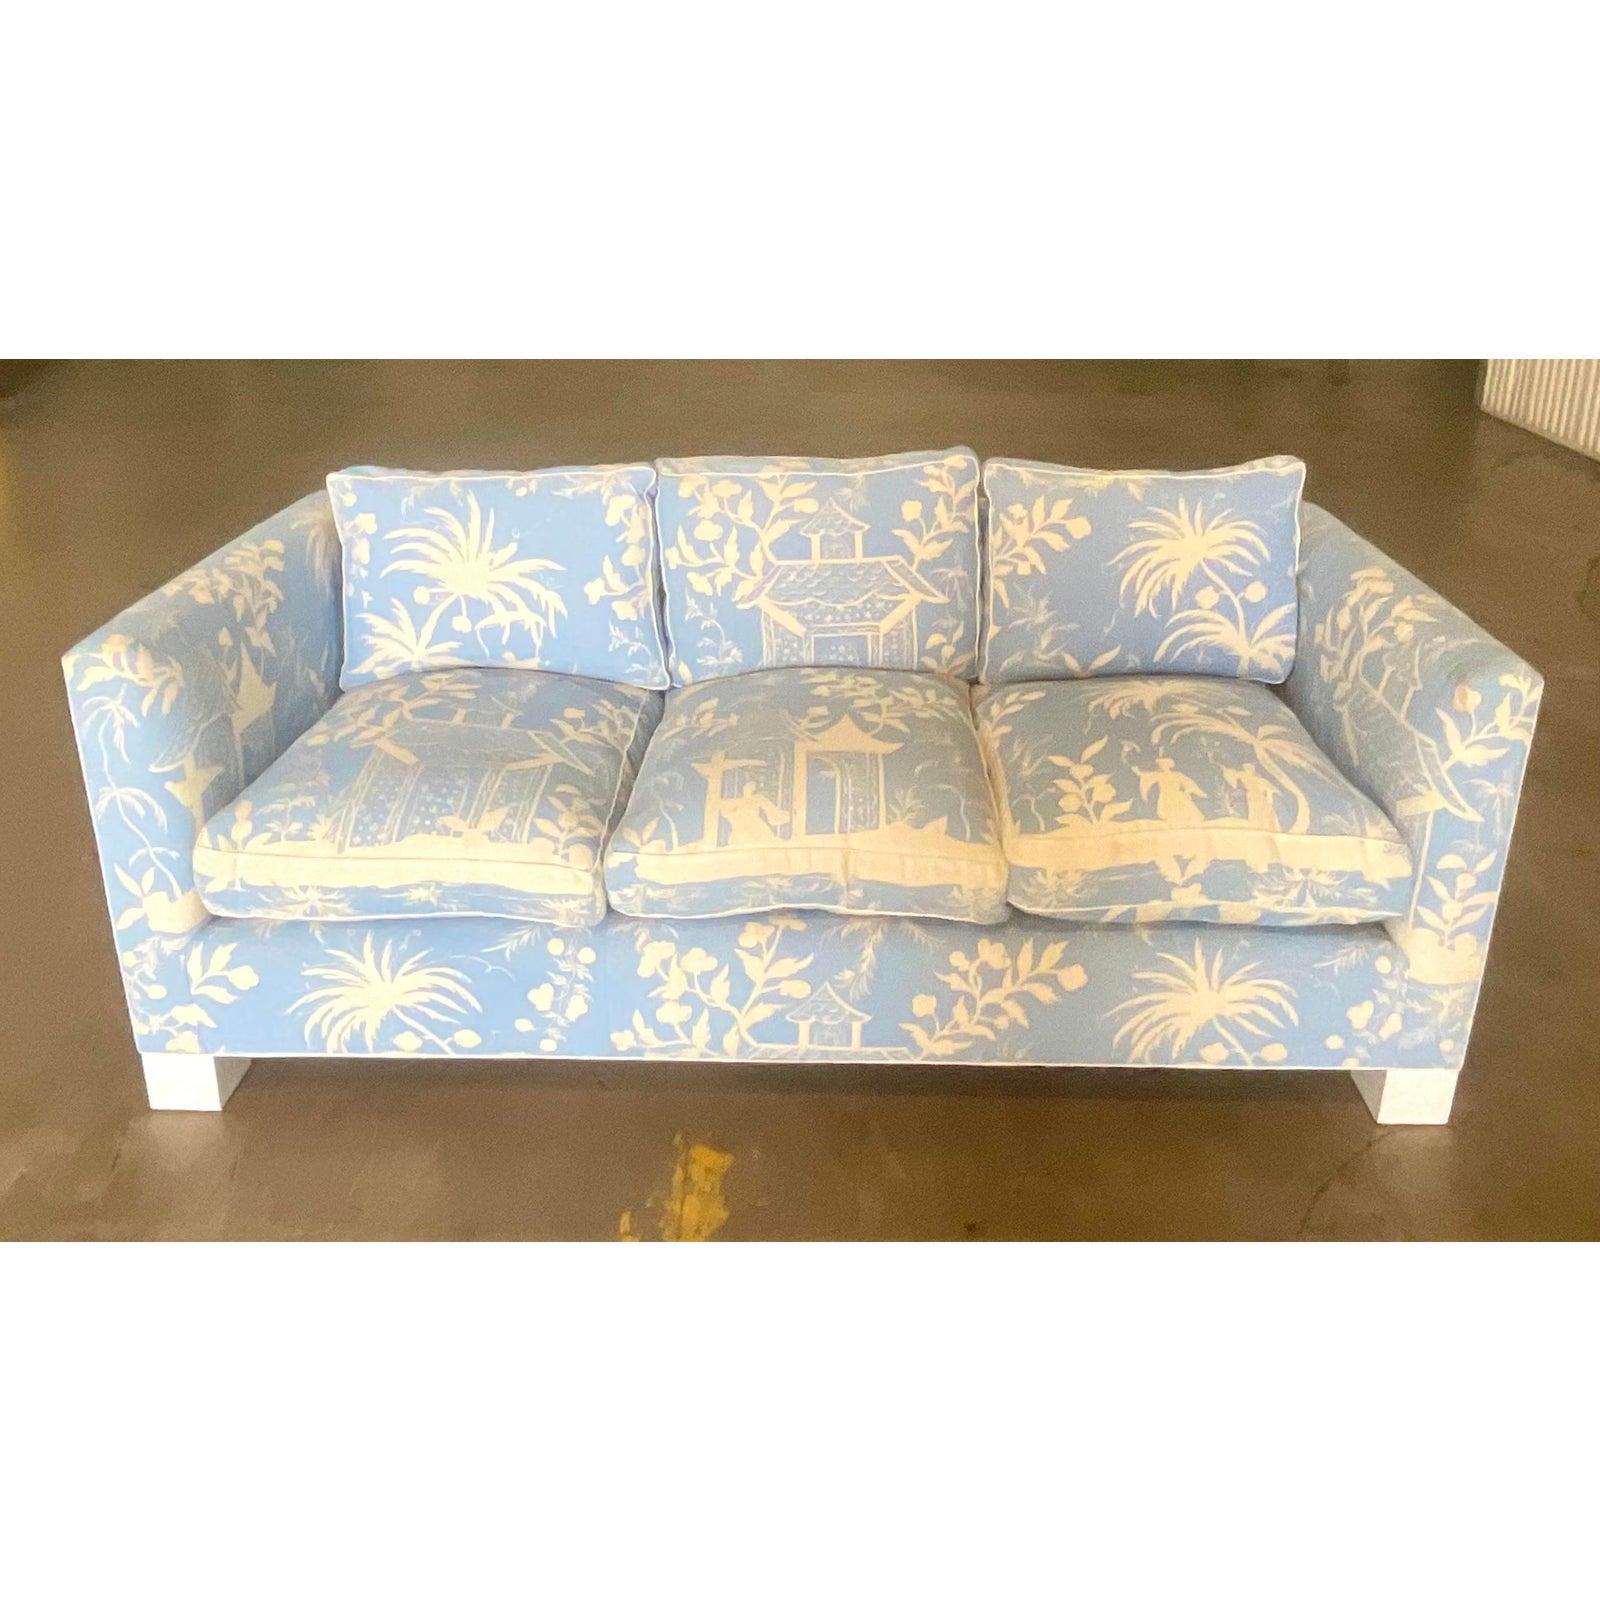 Spectacular vintage custom built Chinoiserie sofa. Done in the coveted Quadrille “China Sea” print. Made especially for the client in a custom pale ice lavender. Down filled with deep seats and clean shape. A breath taking addition to any project.